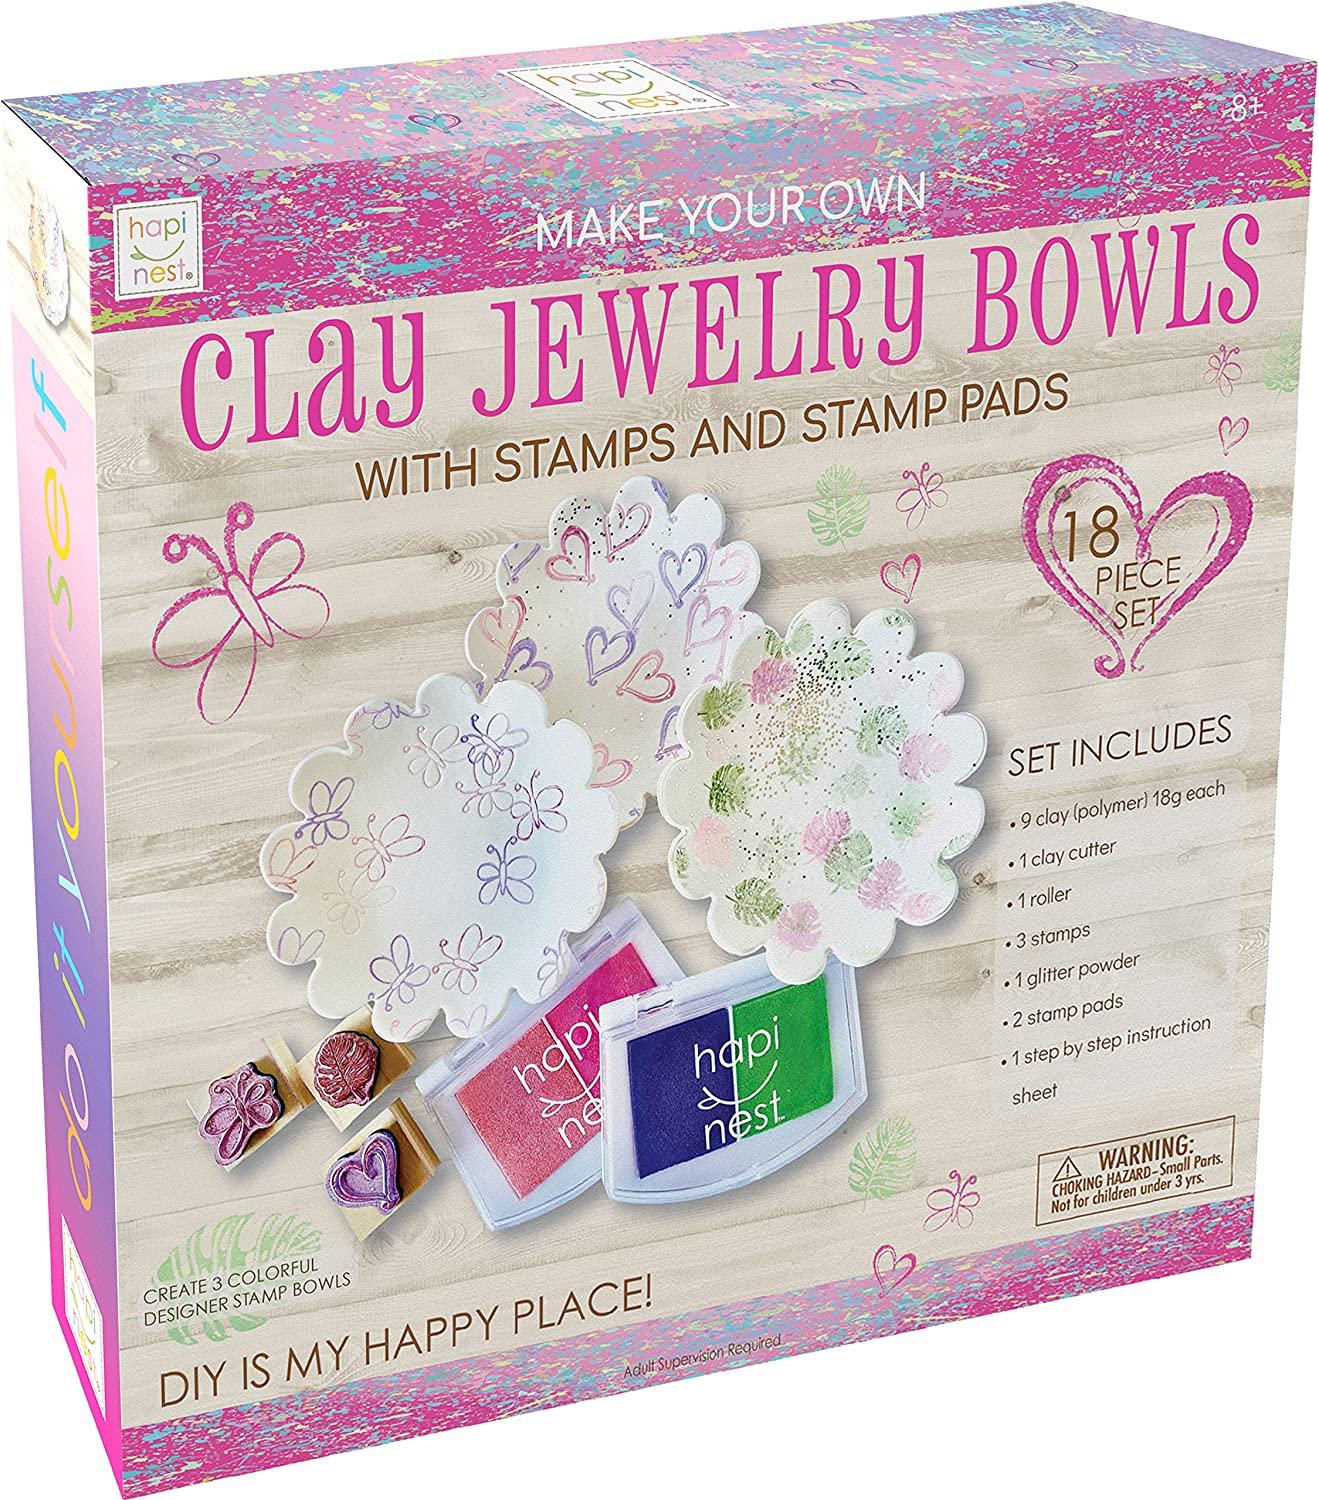 Hapinest Non-Toxic Polymer Clay Bowls Art Kit For 9-12 Year Olds